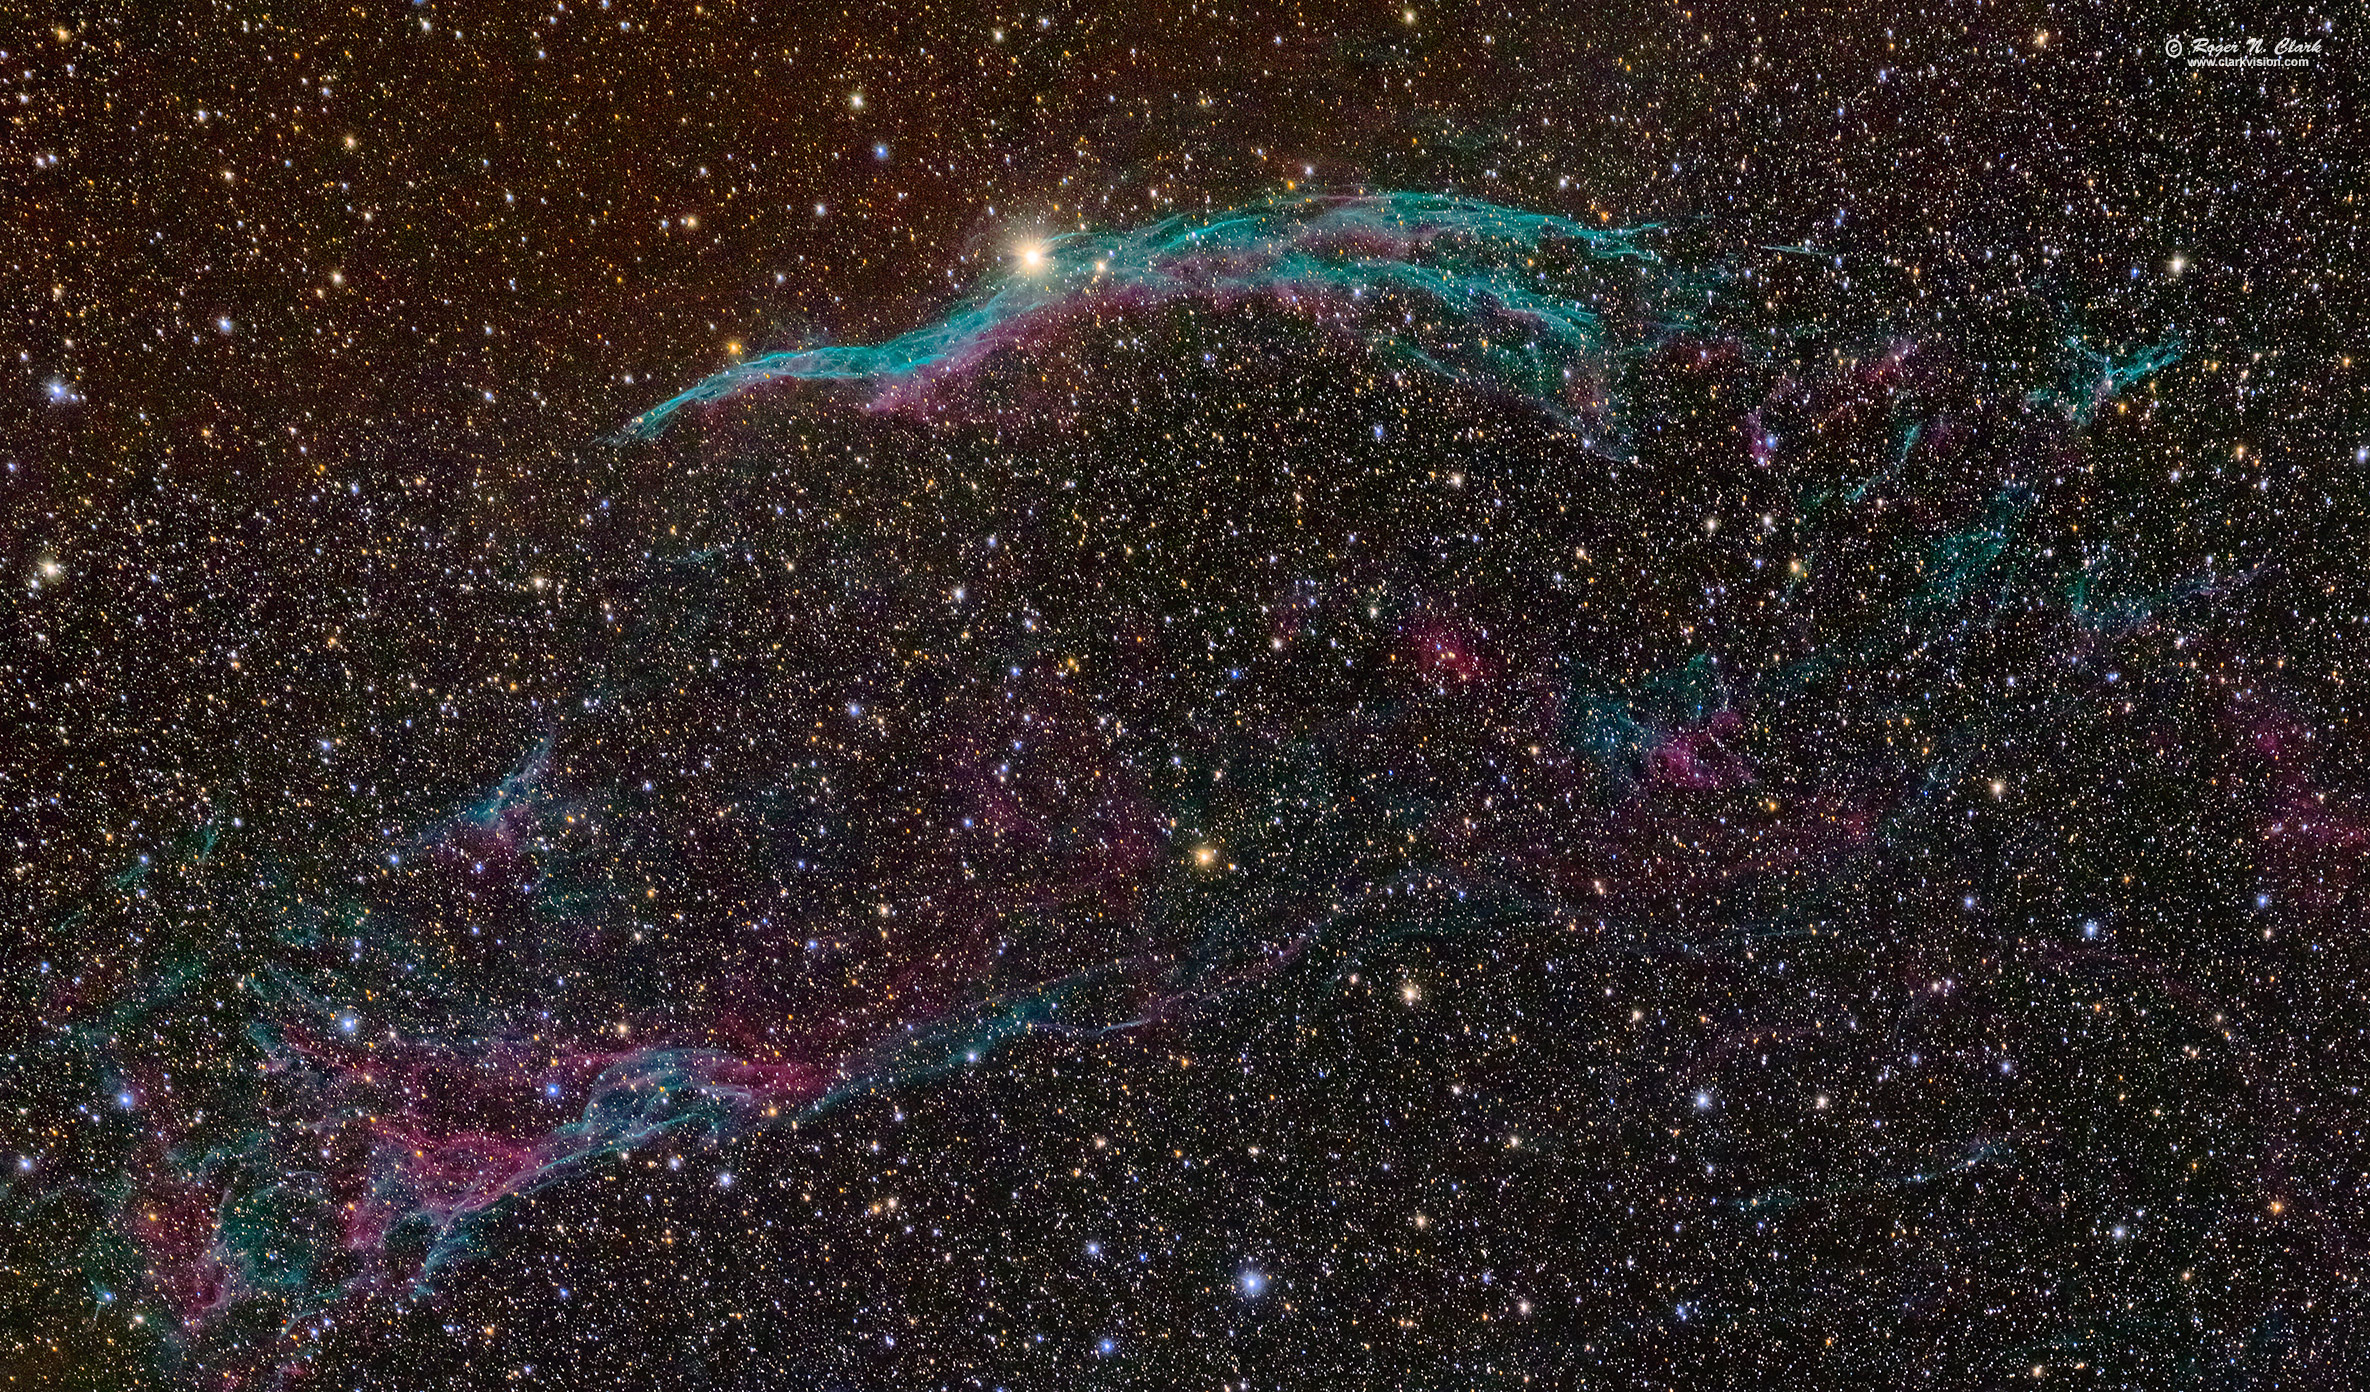 image veil-west-500mm-r5-rnclark-c09.05.2021-4C3A9975-84-av9.j-c3-0.5x.jpg is Copyrighted by Roger N. Clark, www.clarkvision.com